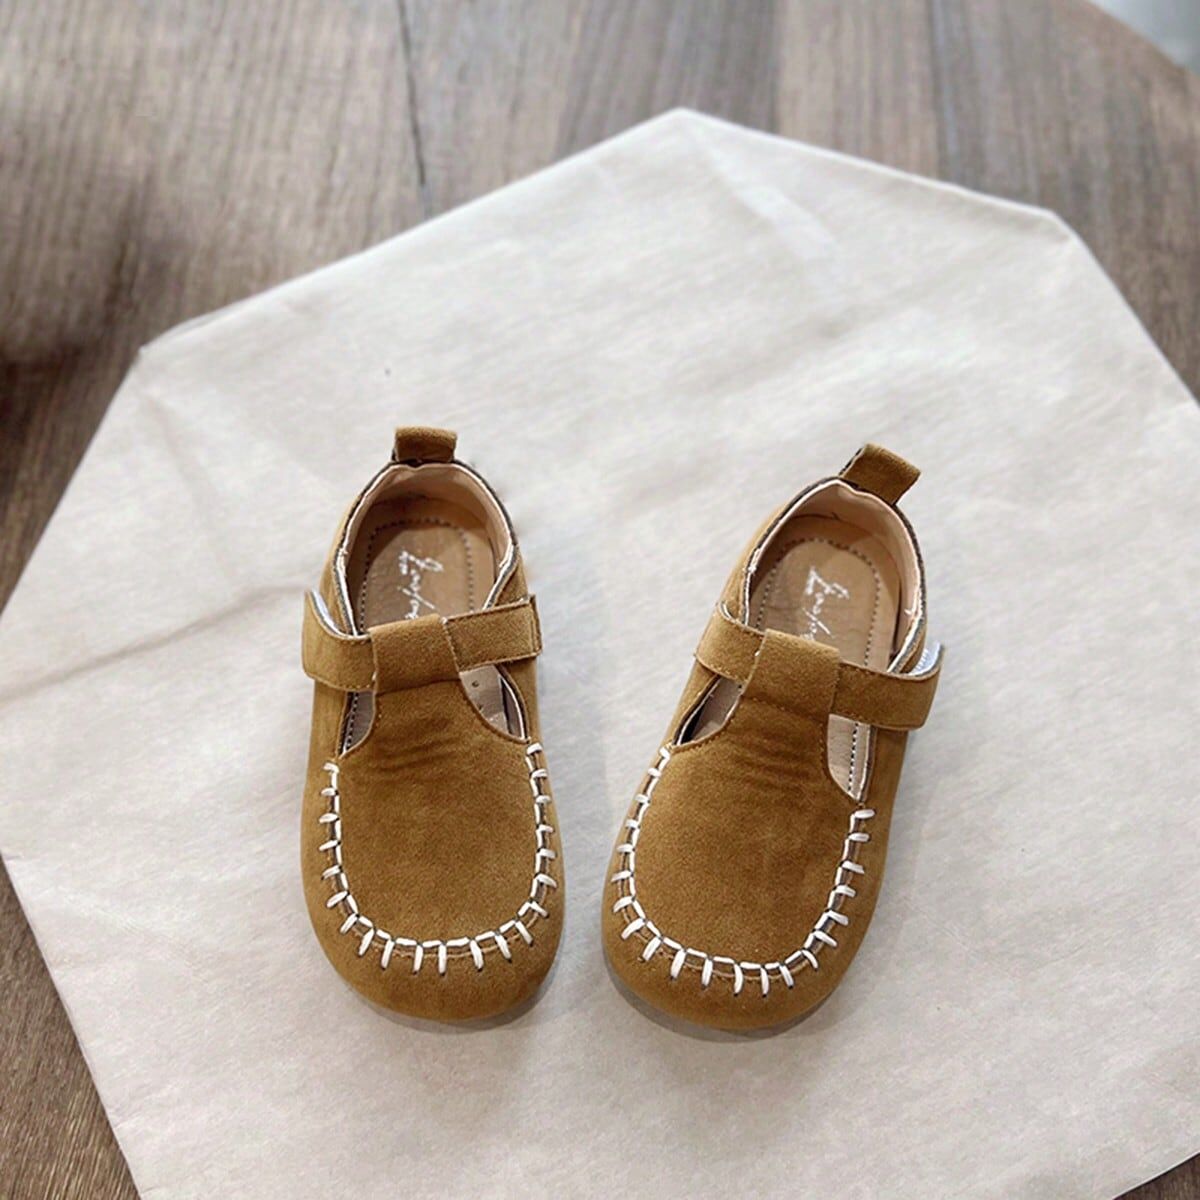 SHEIN British Style Children's Buckle Shoes For Girls' Spring And Autumn New Model Girls' Single Shoes, Soft Bottom Flat Shoes For Kids Khaki CN21,CN22,CN23,CN24,CN25,CN26,CN27,CN28,CN29,CN30